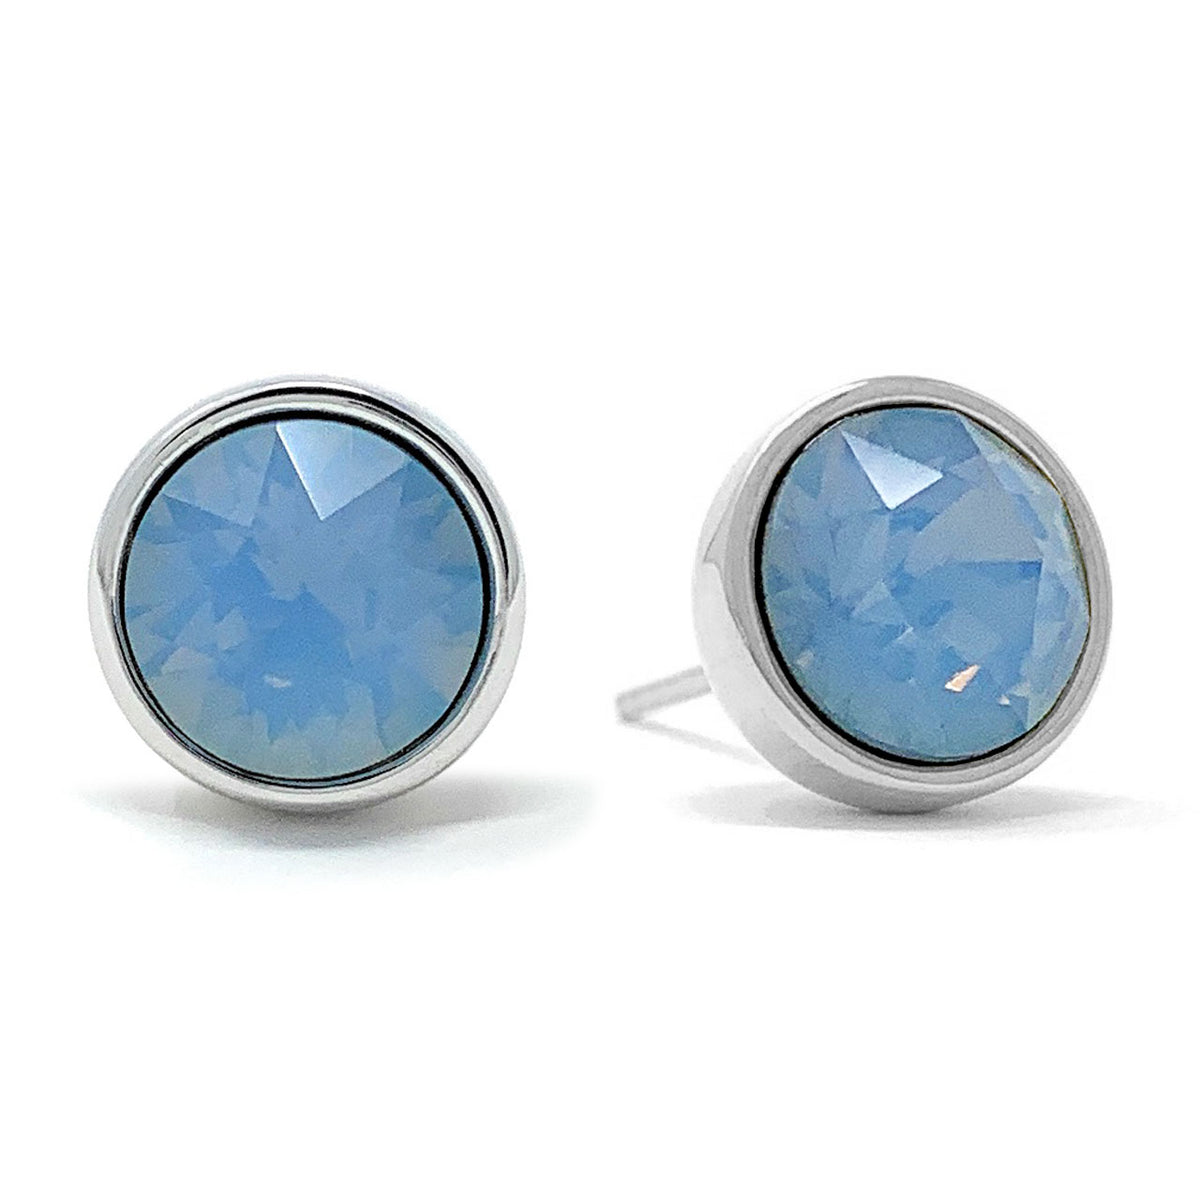 Harley Stud Earrings with Air Blue Round Opals from Swarovski Silver Toned Rhodium Plated - Ed Heart